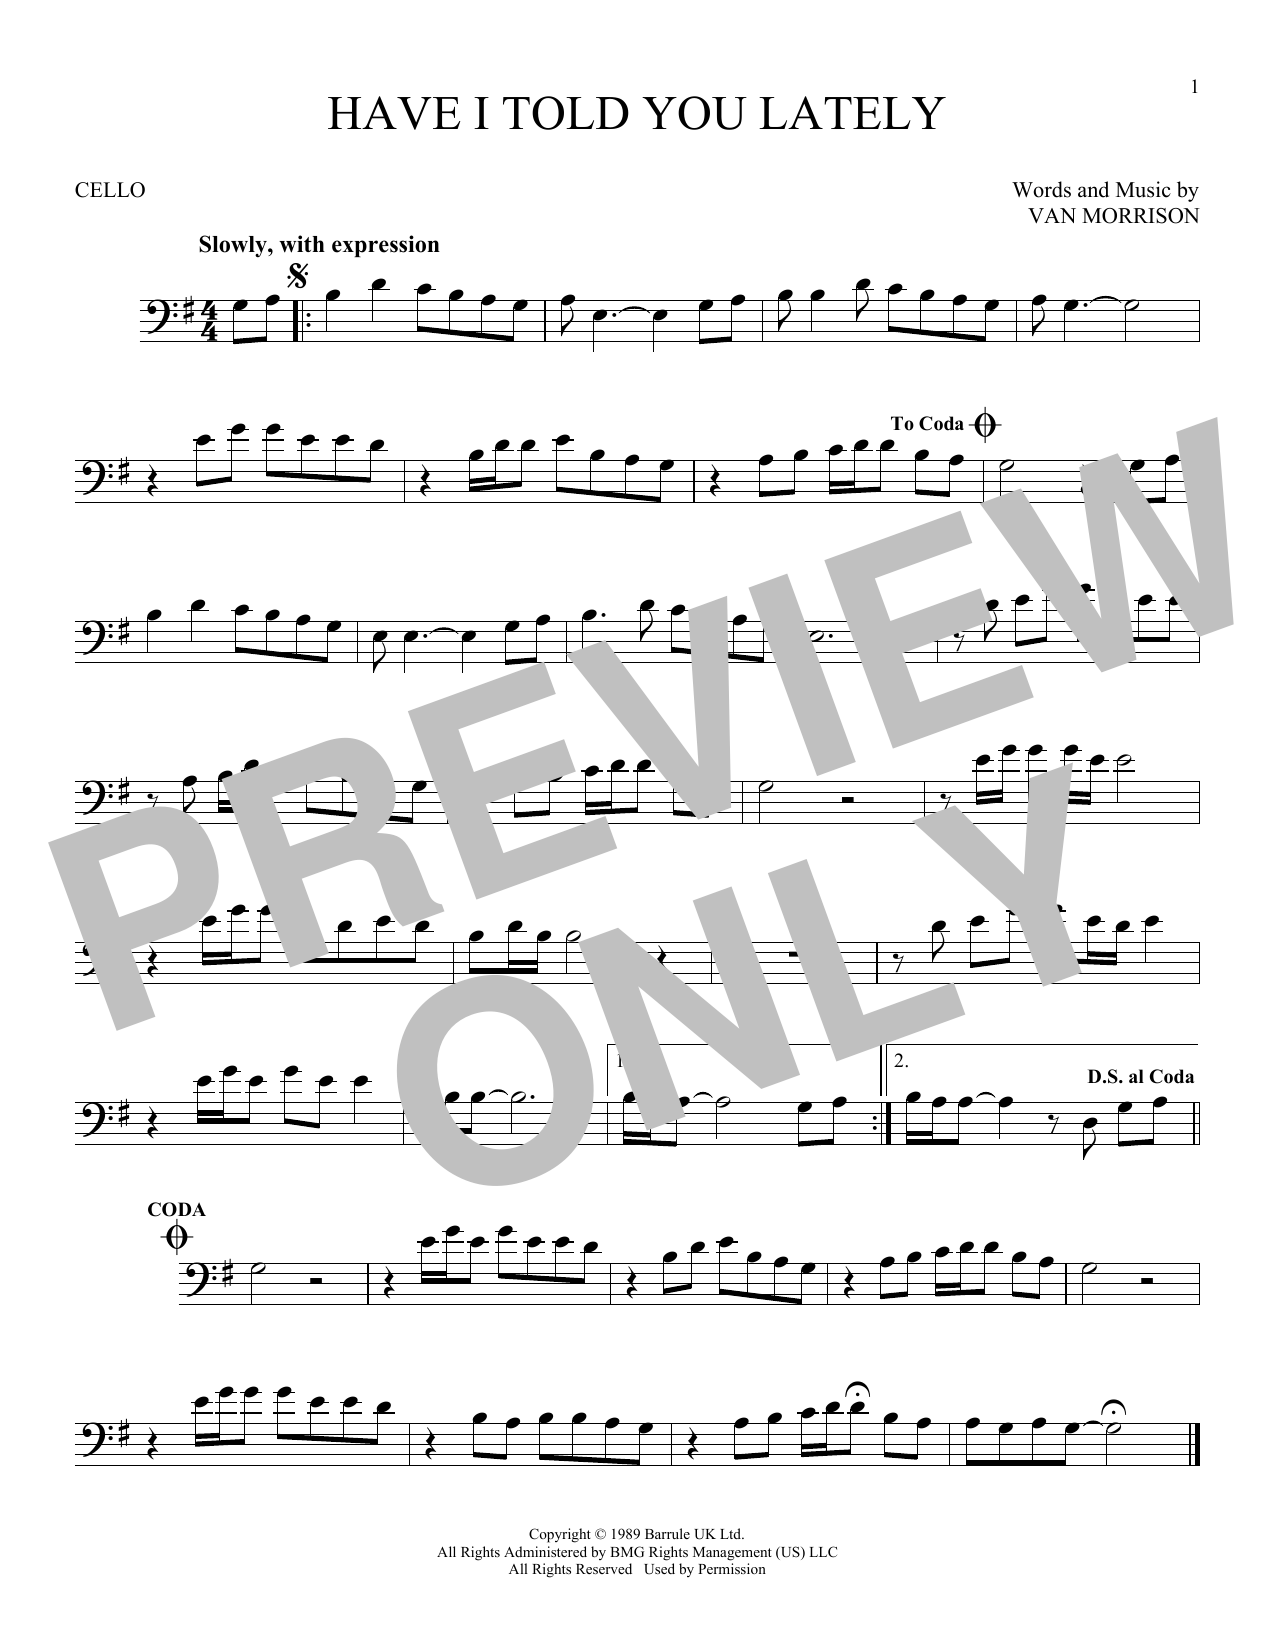 Download Van Morrison Have I Told You Lately Sheet Music